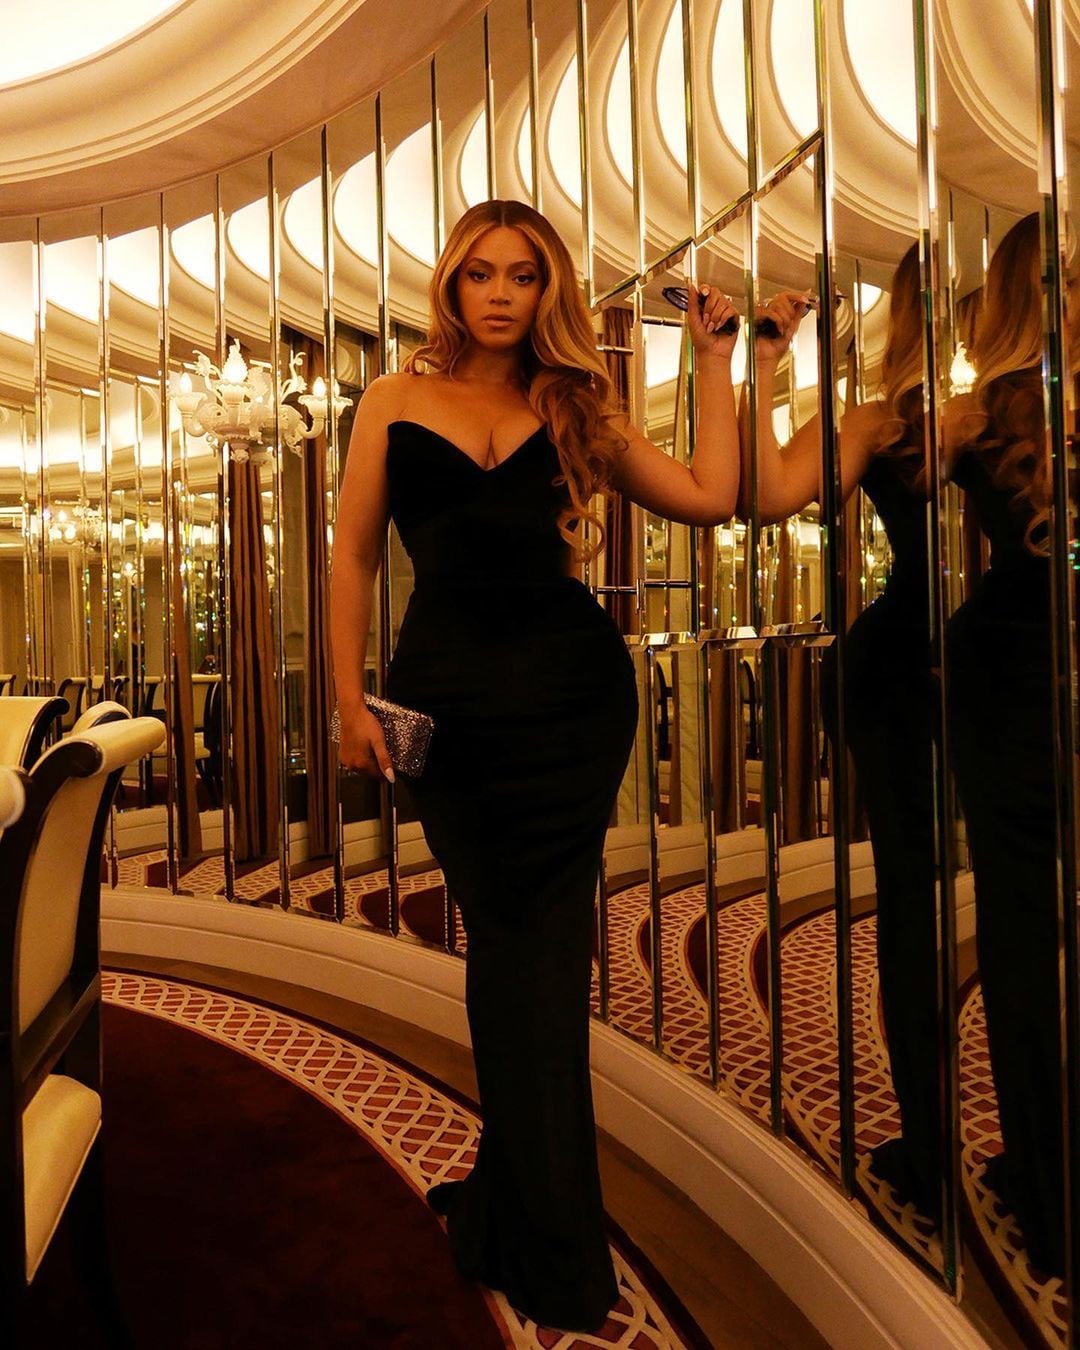 Beyonce flaunts her perfectly curvaceous figure in the black gown.